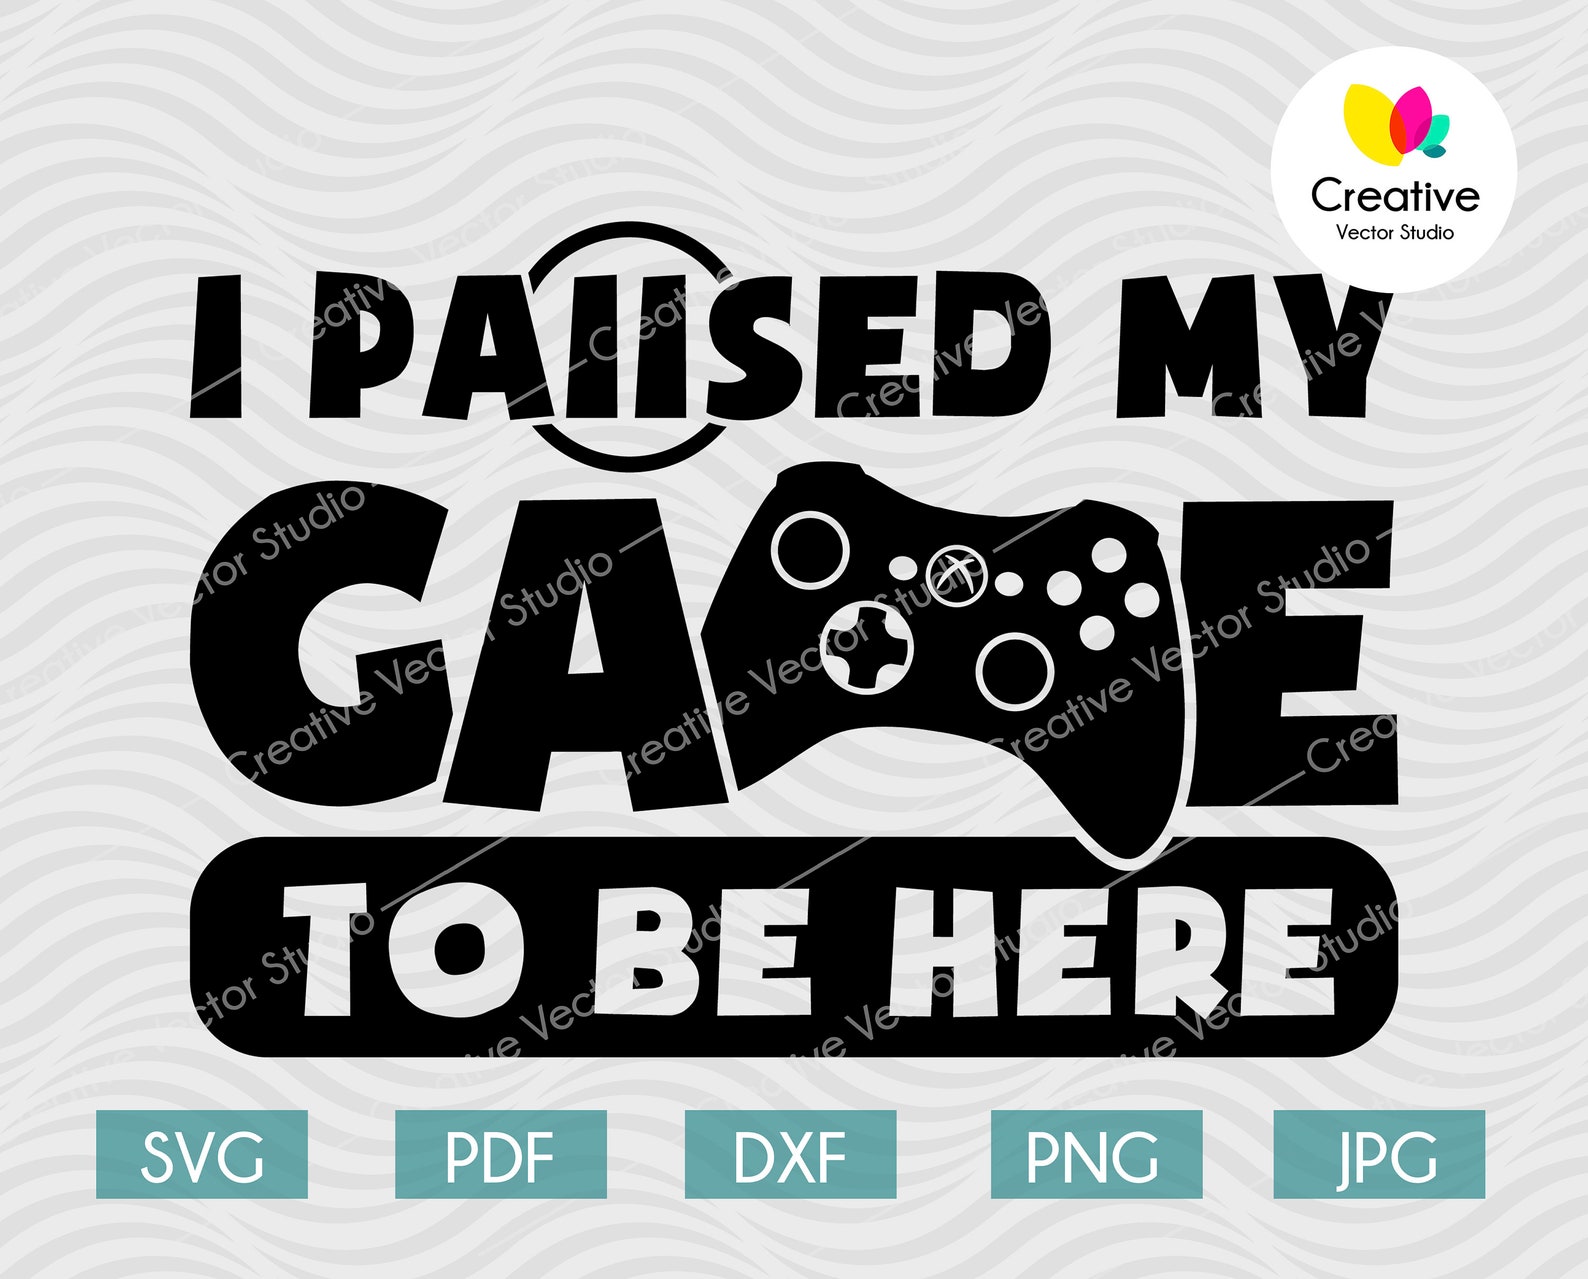 My games логотип. I Paused my game to be here PNG. I Paused my game to be here. M y game